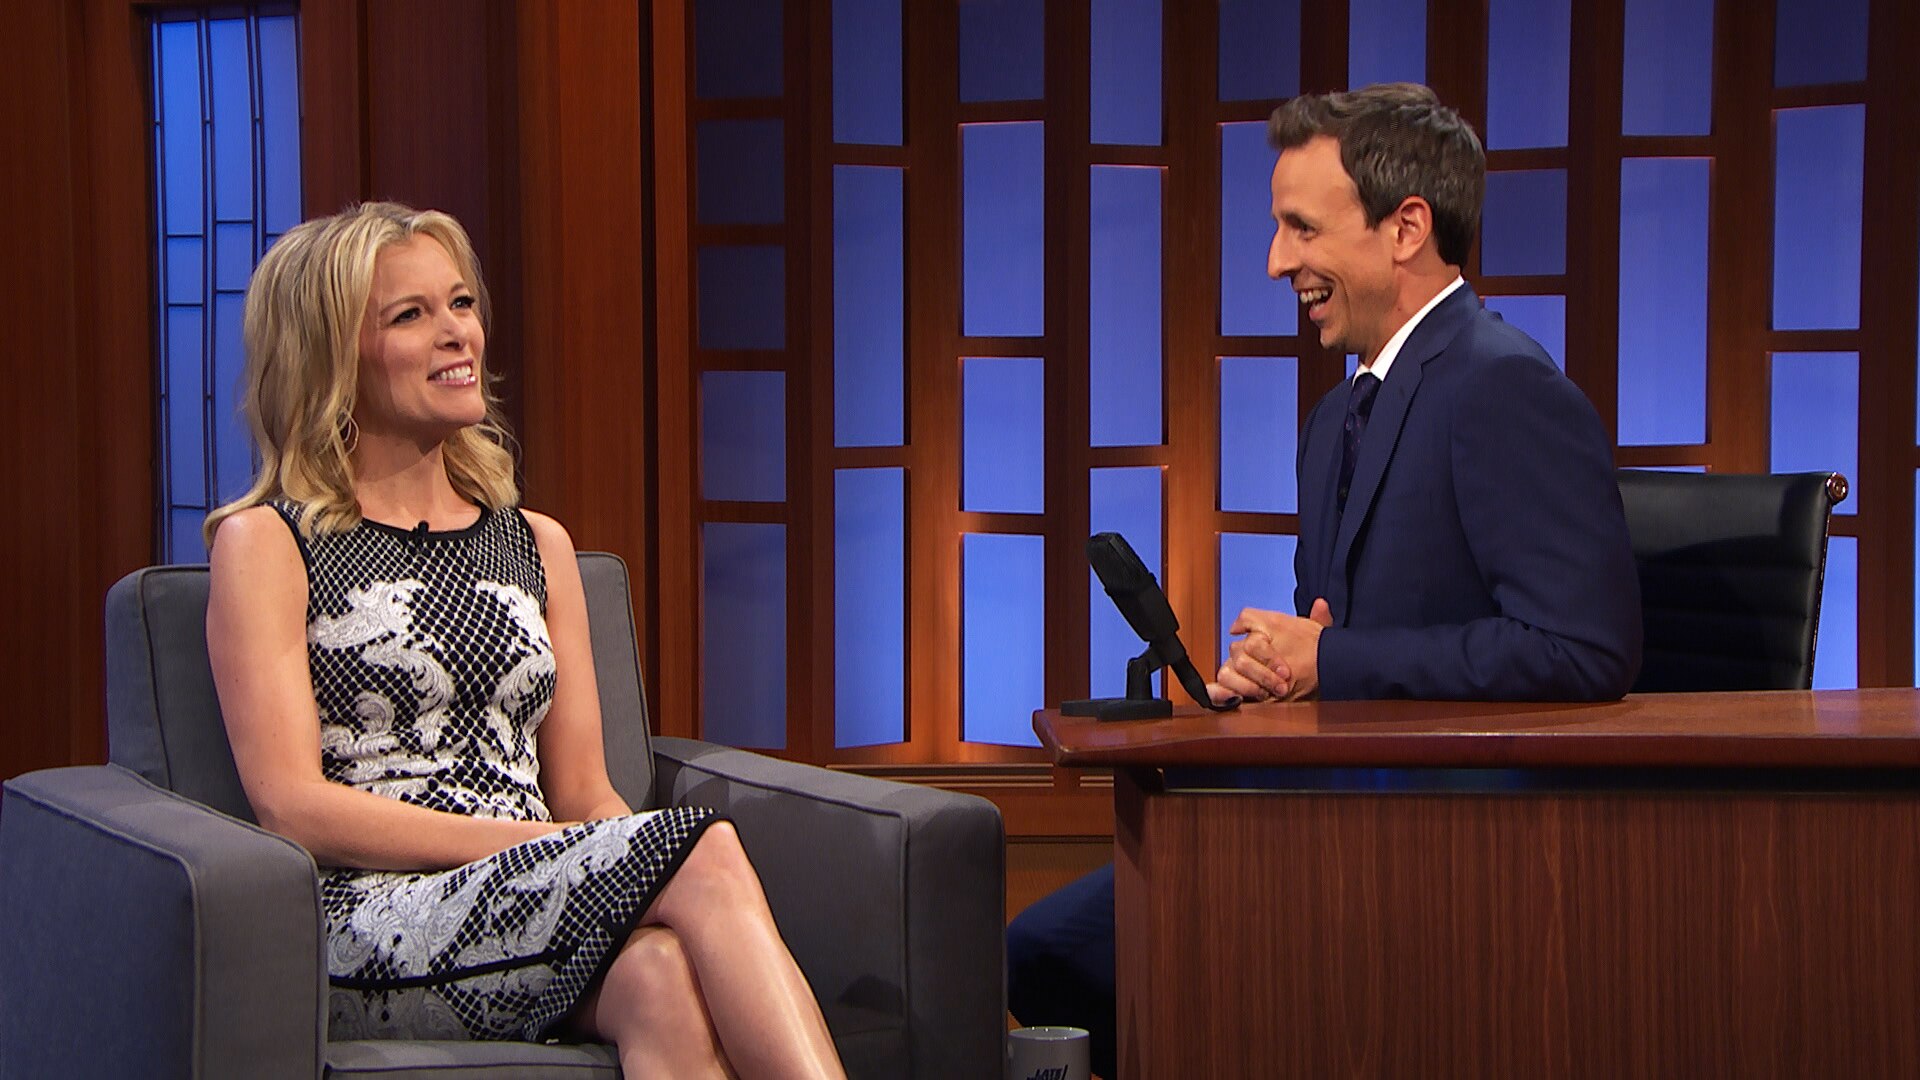 Watch Late Night with Seth Meyers Interview: Megyn Kelly Interview, Part 1 - NBC.com1920 x 1080